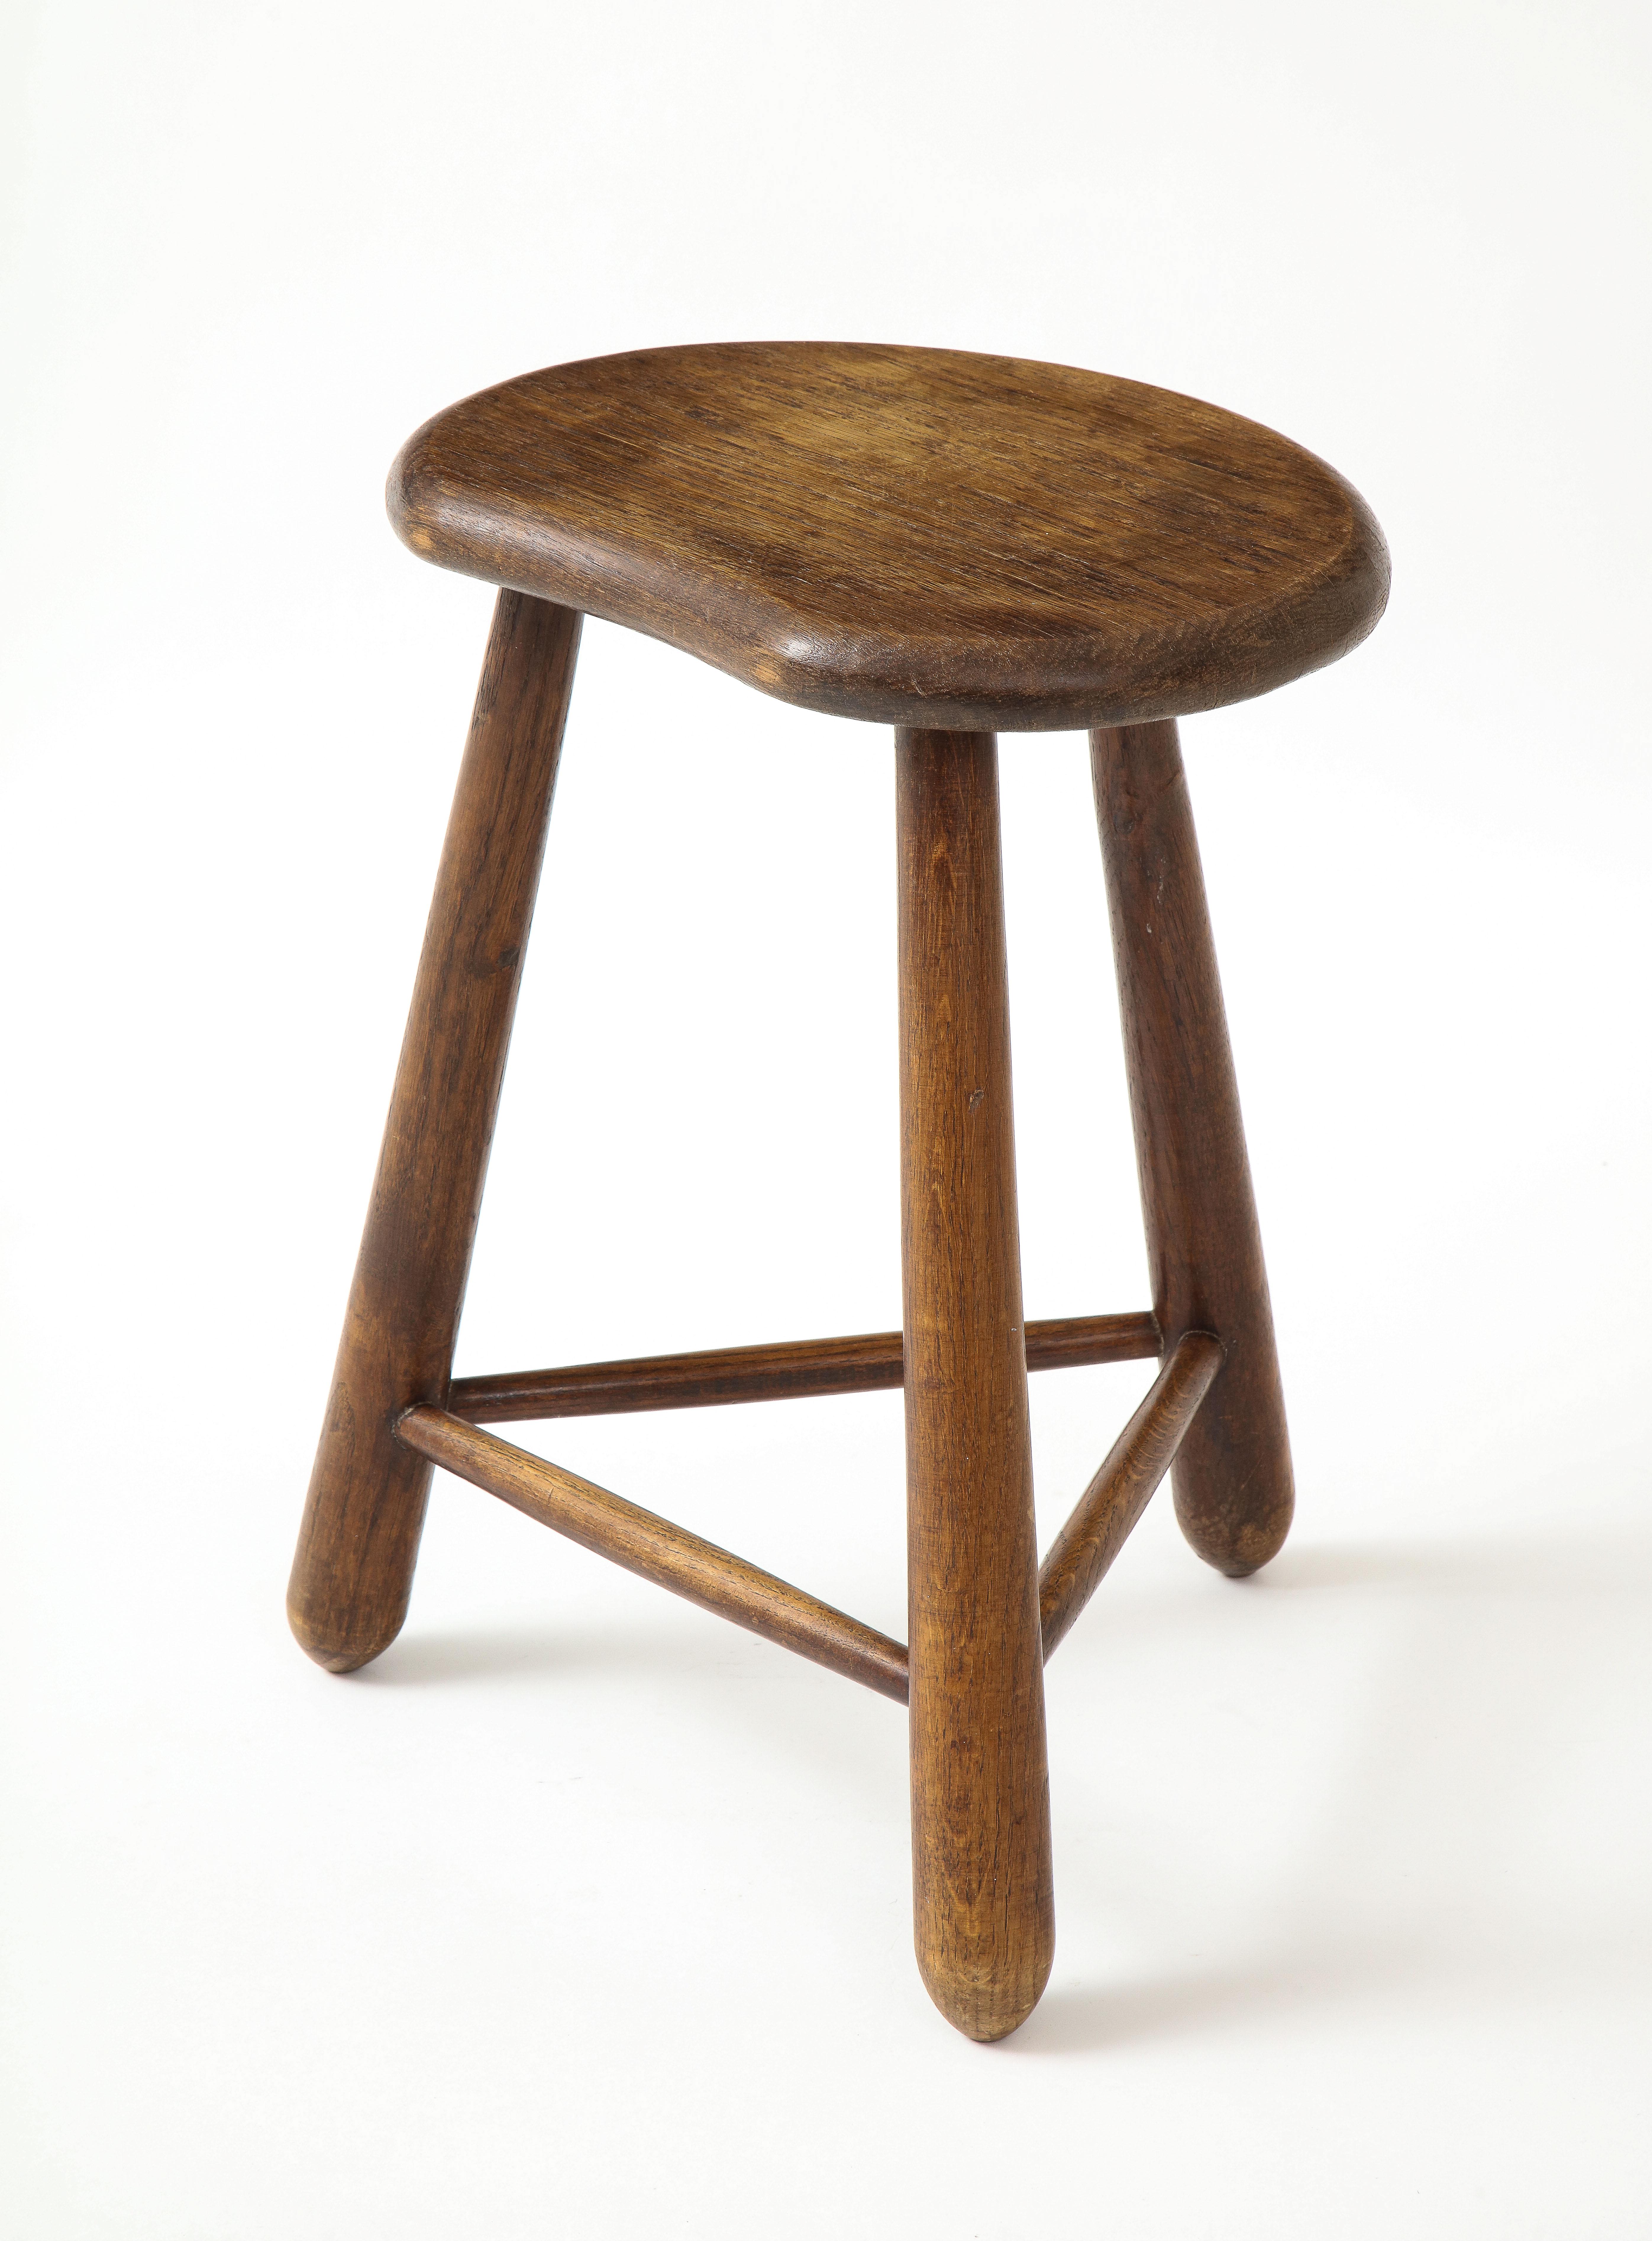 Mid-20th Century Curious French Oak Stool, c. 1950